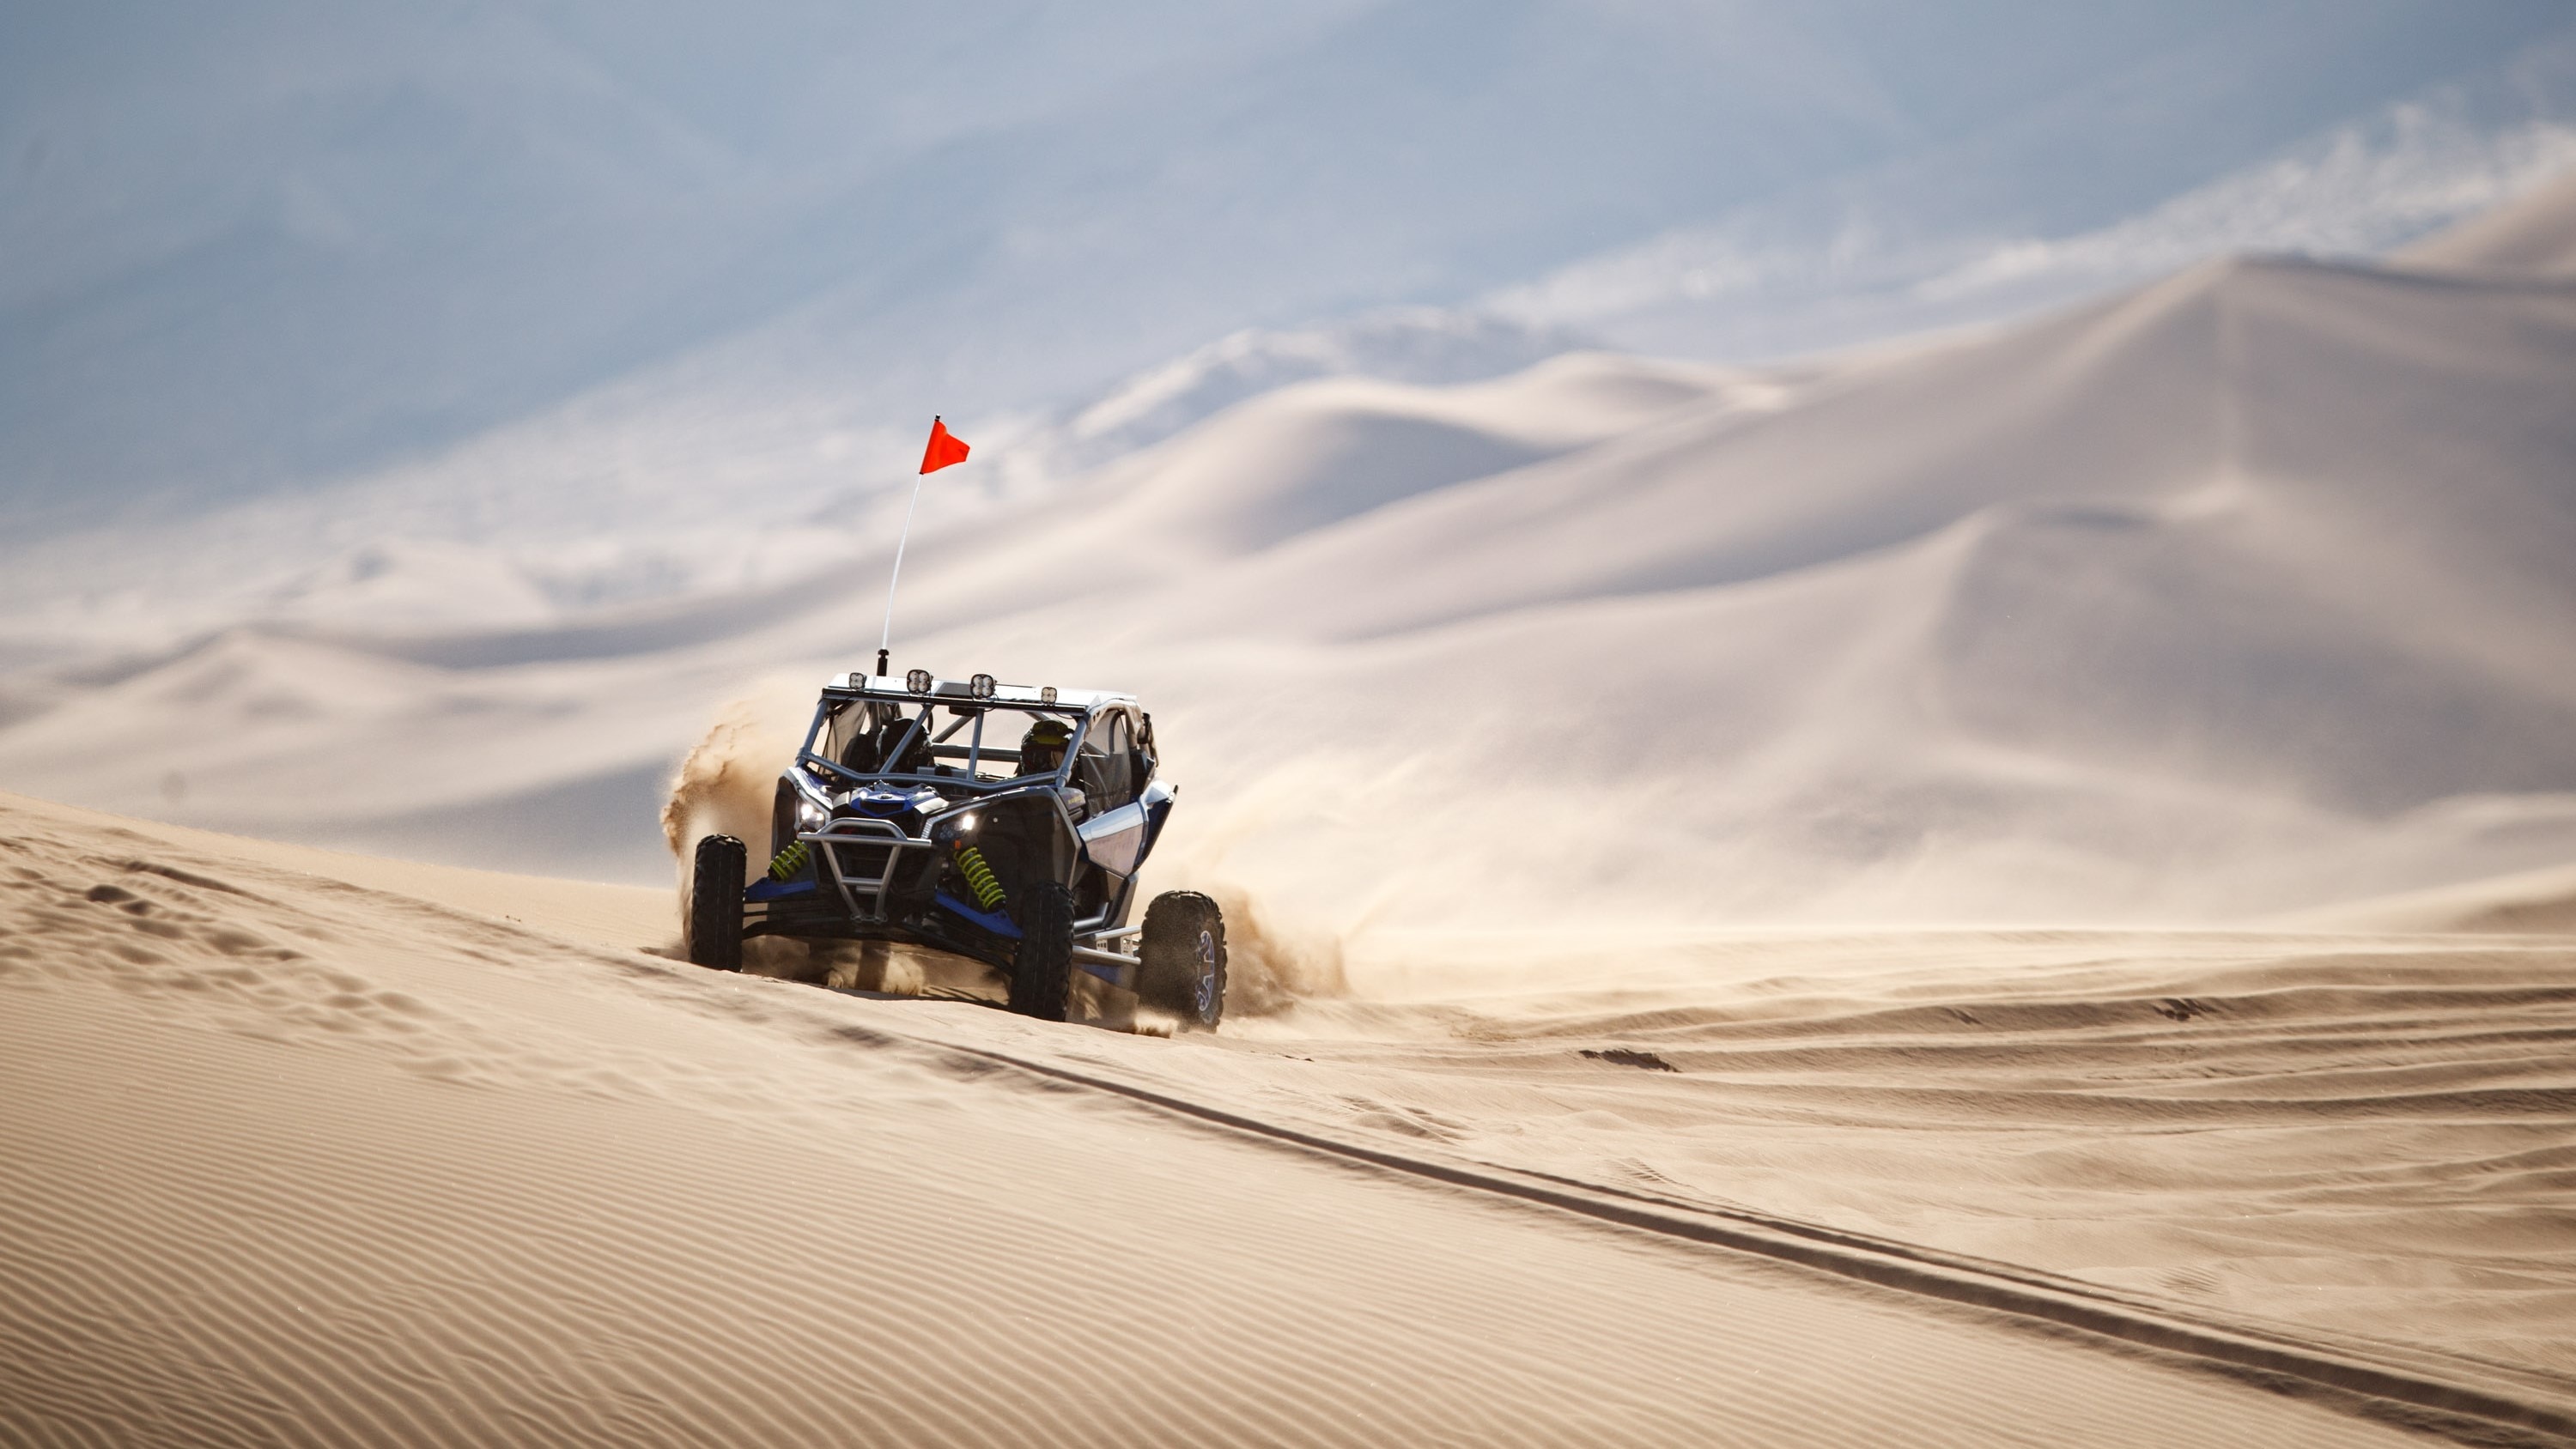 Side view of a Can-Am Maverick X3 kicking up sand as it drives at the base of a rock pile. 